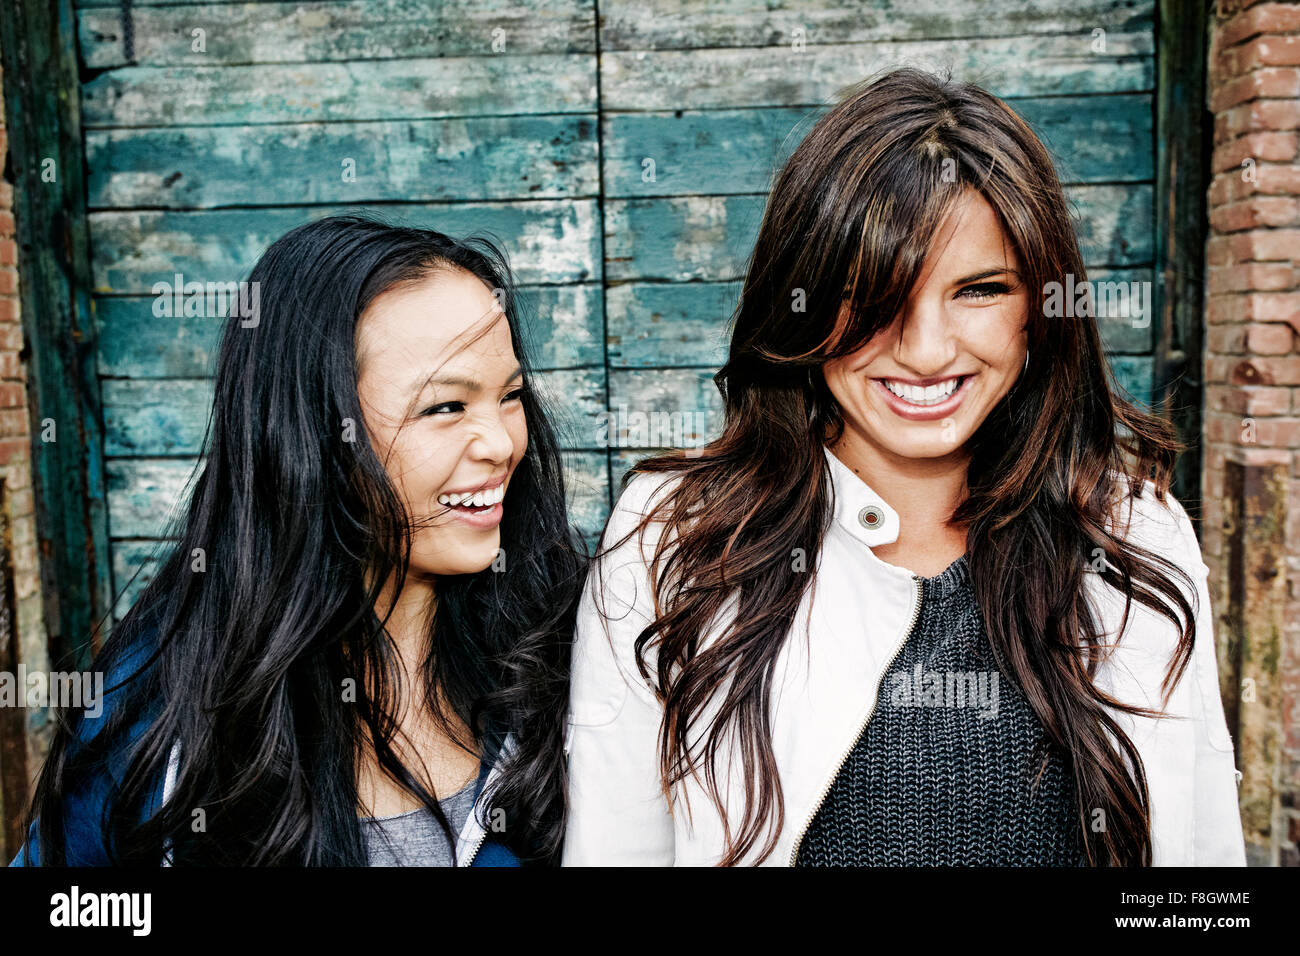 Women laughing at wooden wall Stock Photo